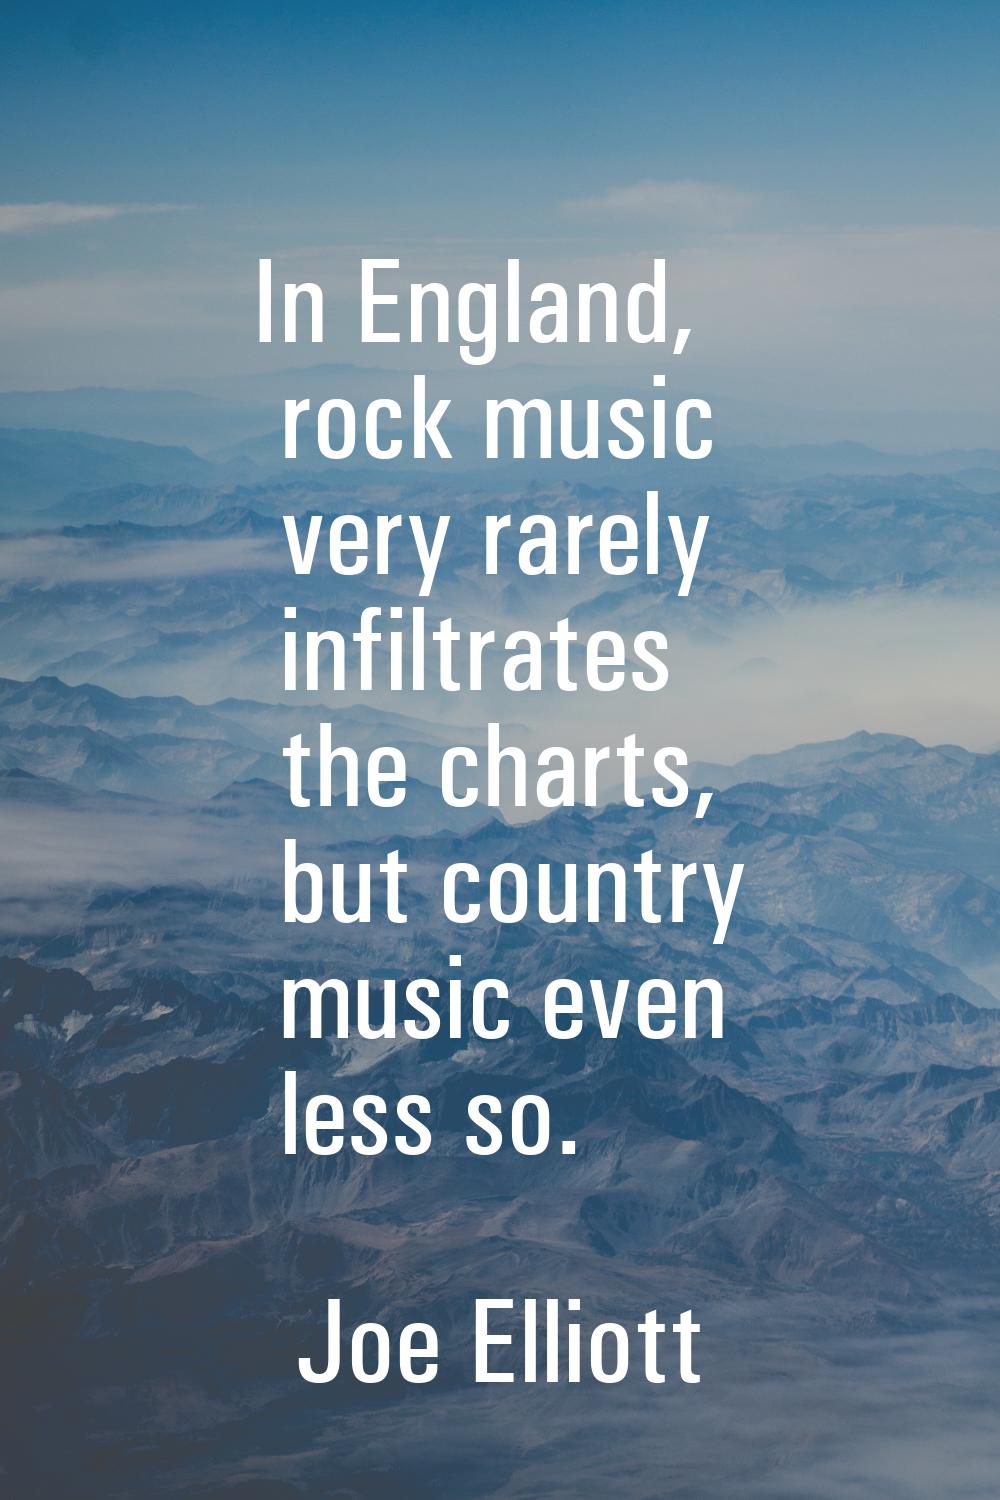 In England, rock music very rarely infiltrates the charts, but country music even less so.